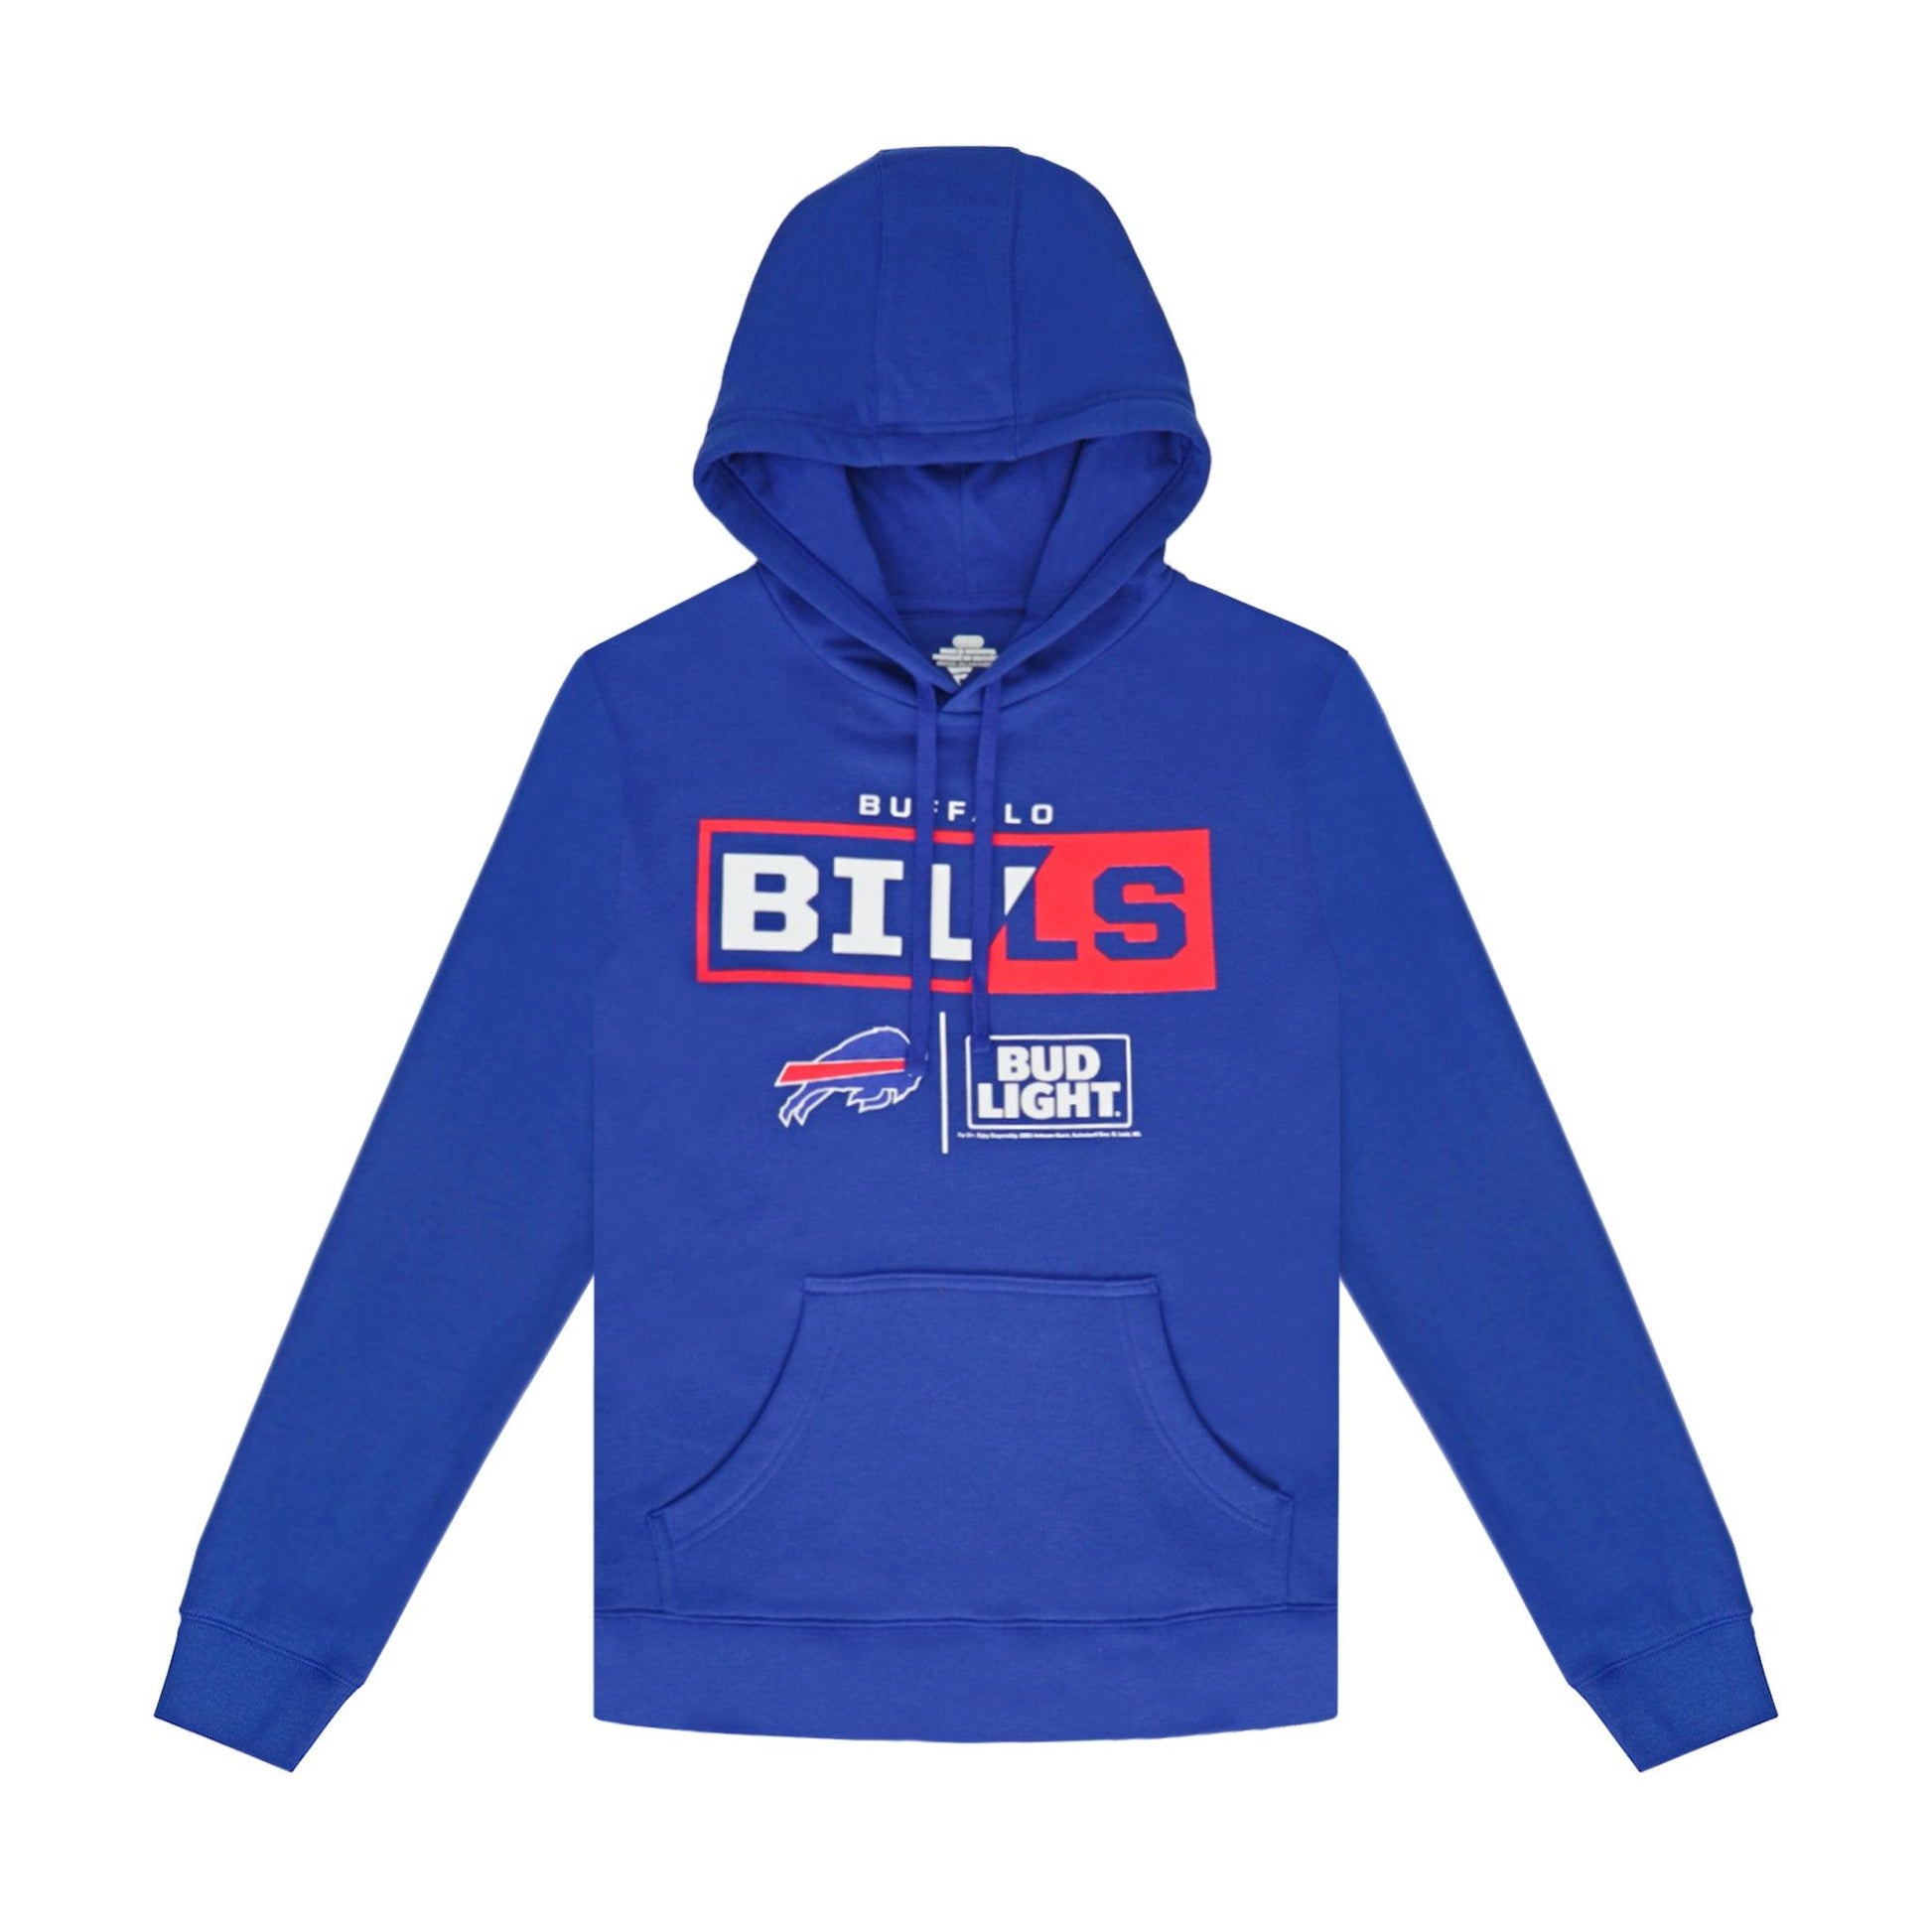 blue hoodie with bills and bud light logo front